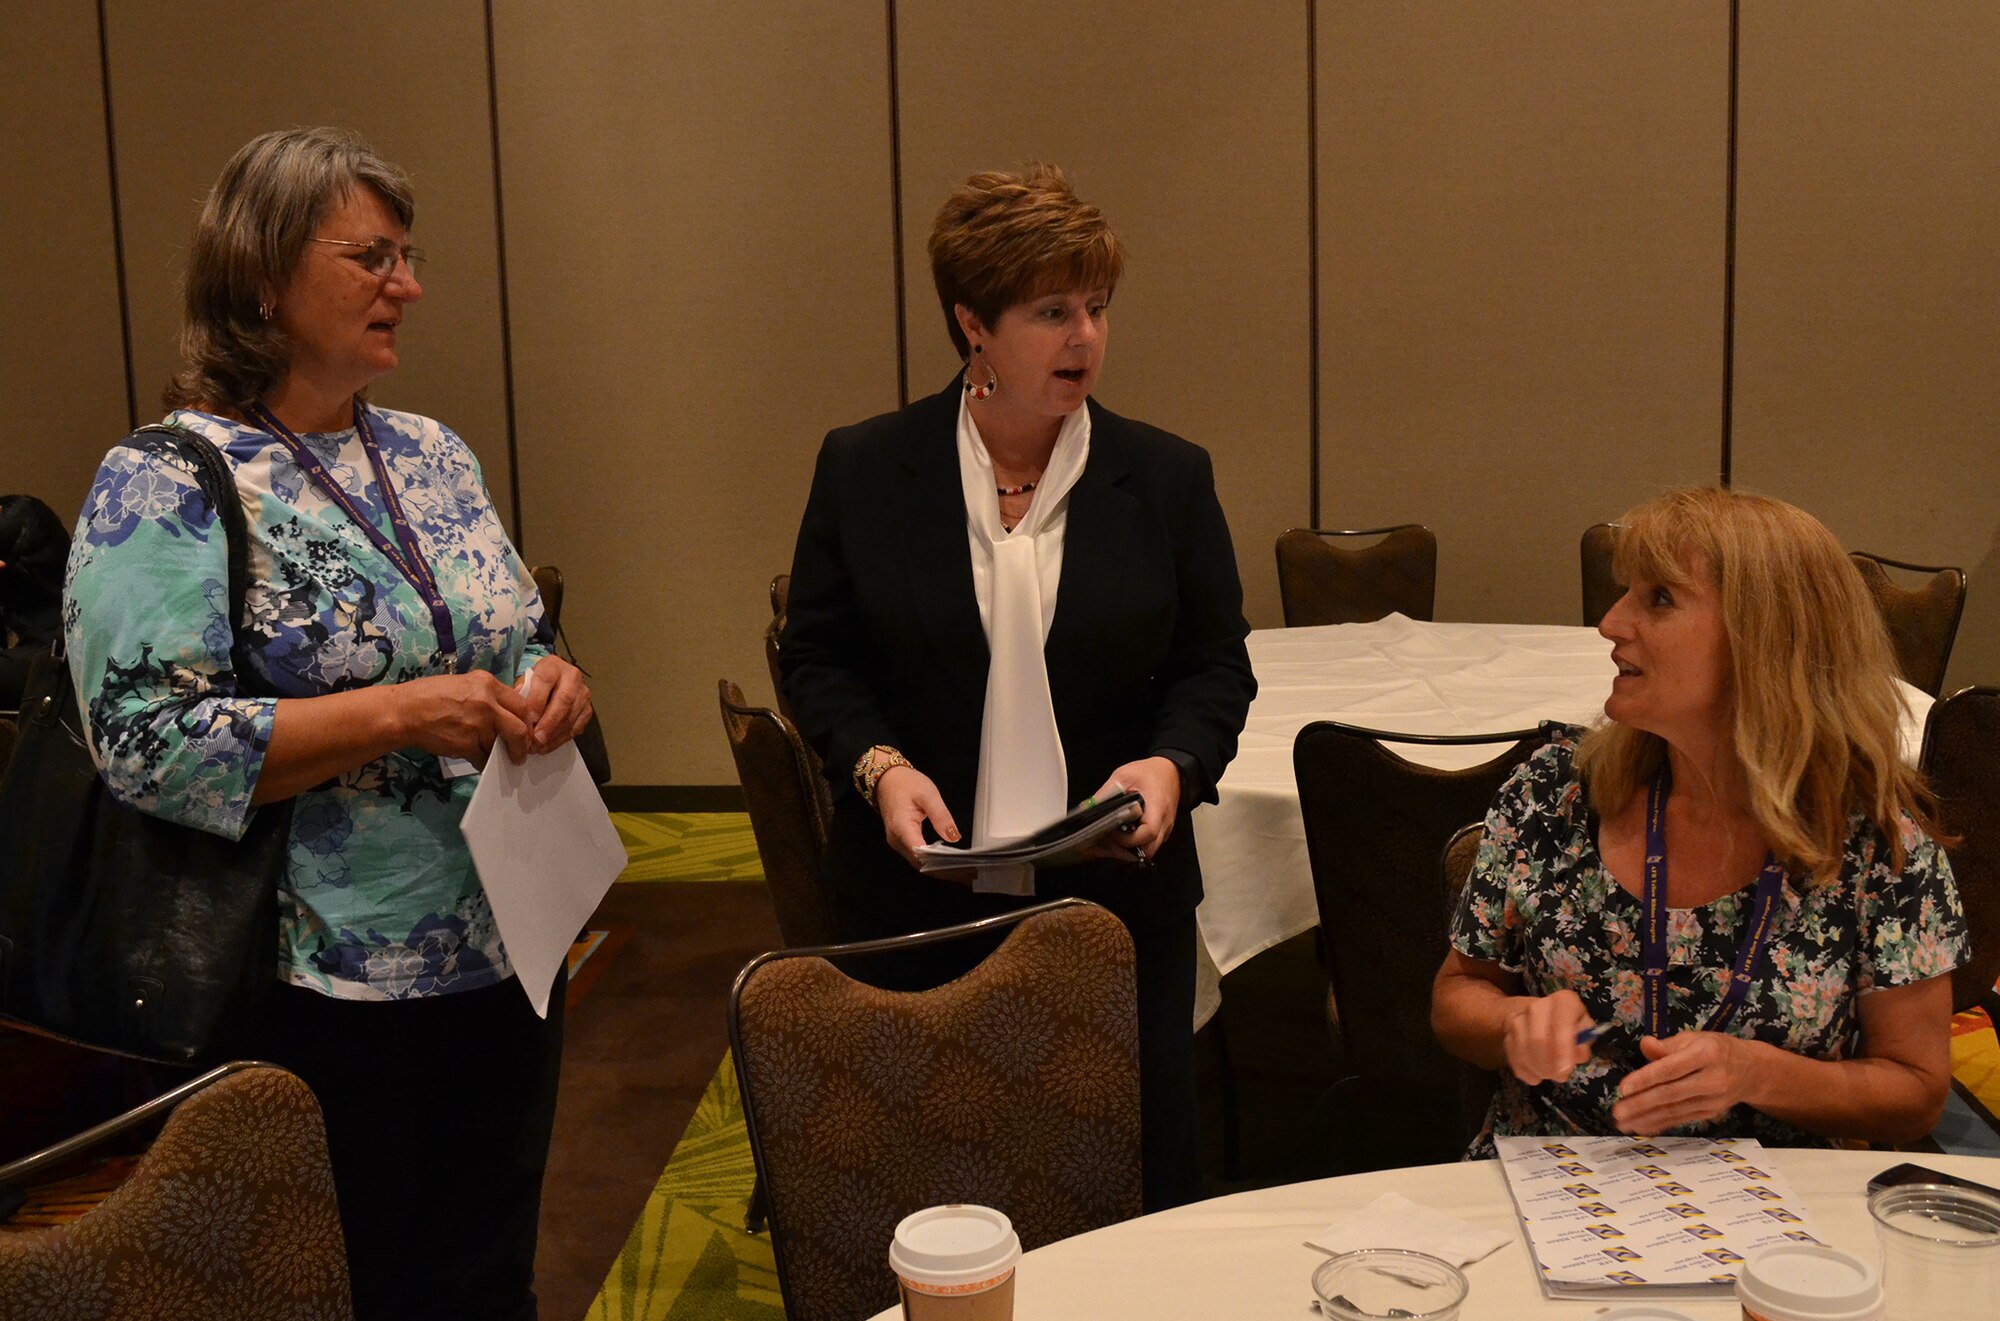 ORLANDO, Fla.—Master Sgt. Sandi Golden-Vest, 445th Airlift Wing Yellow Ribbon Program representative, (center) shares information with Tech. Sgt. Eugenie Hinson, 445th Airlift Wing historian (far right) and her sister Lynn DeWolf  at a Yellow Ribbon event  July 25, 2015 in Orlando, Florida. (U.S. Air Force photo/Senior Airman Joel McCullough)